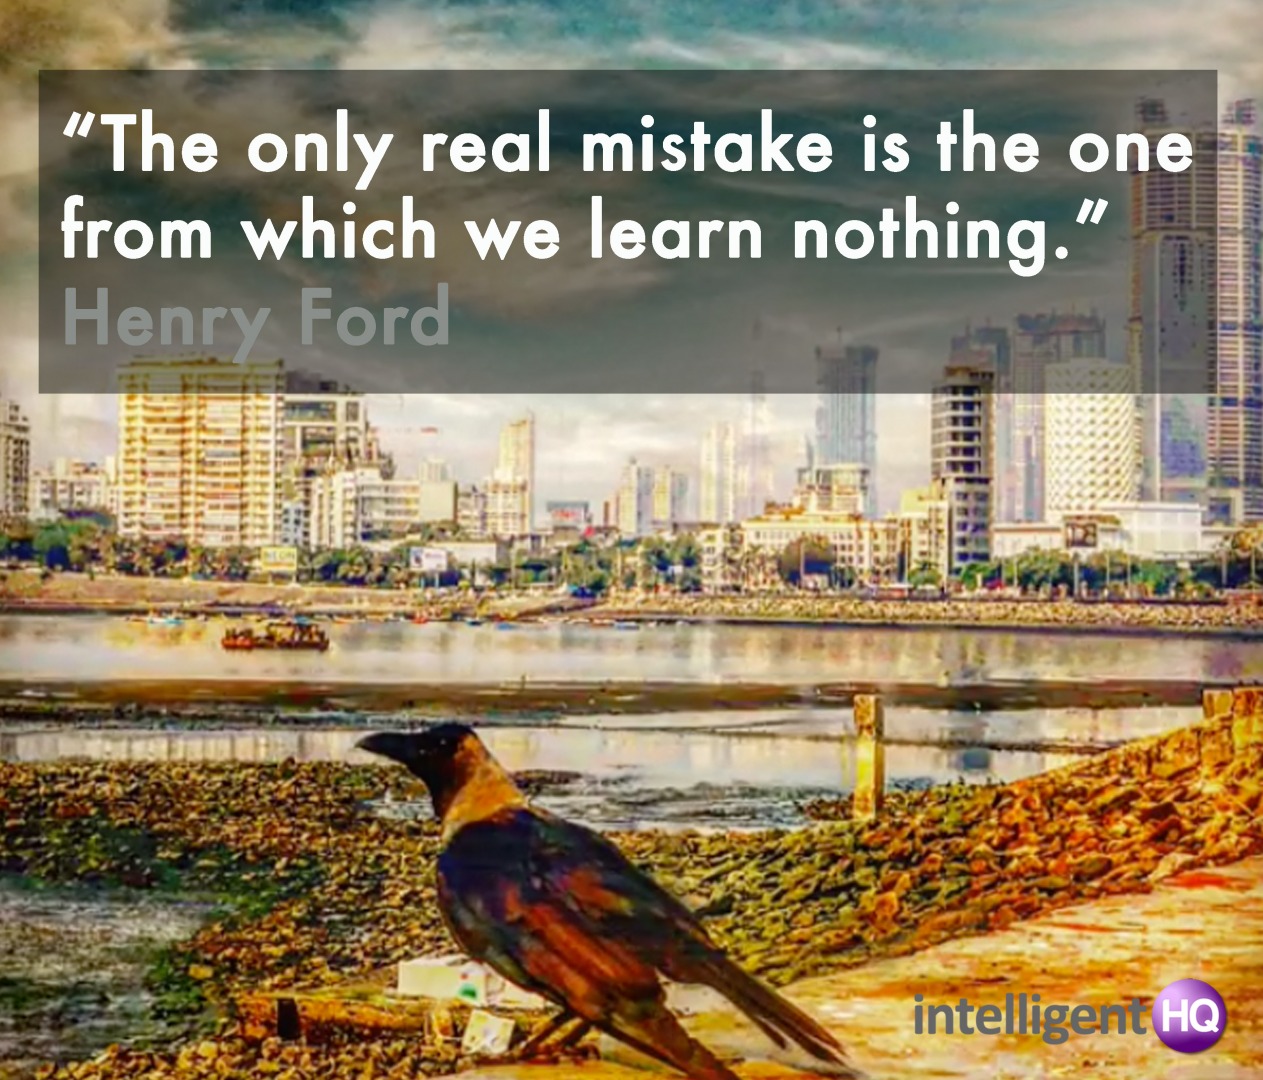 "The only real mistake is the one from which we learn nothing." Henry Ford